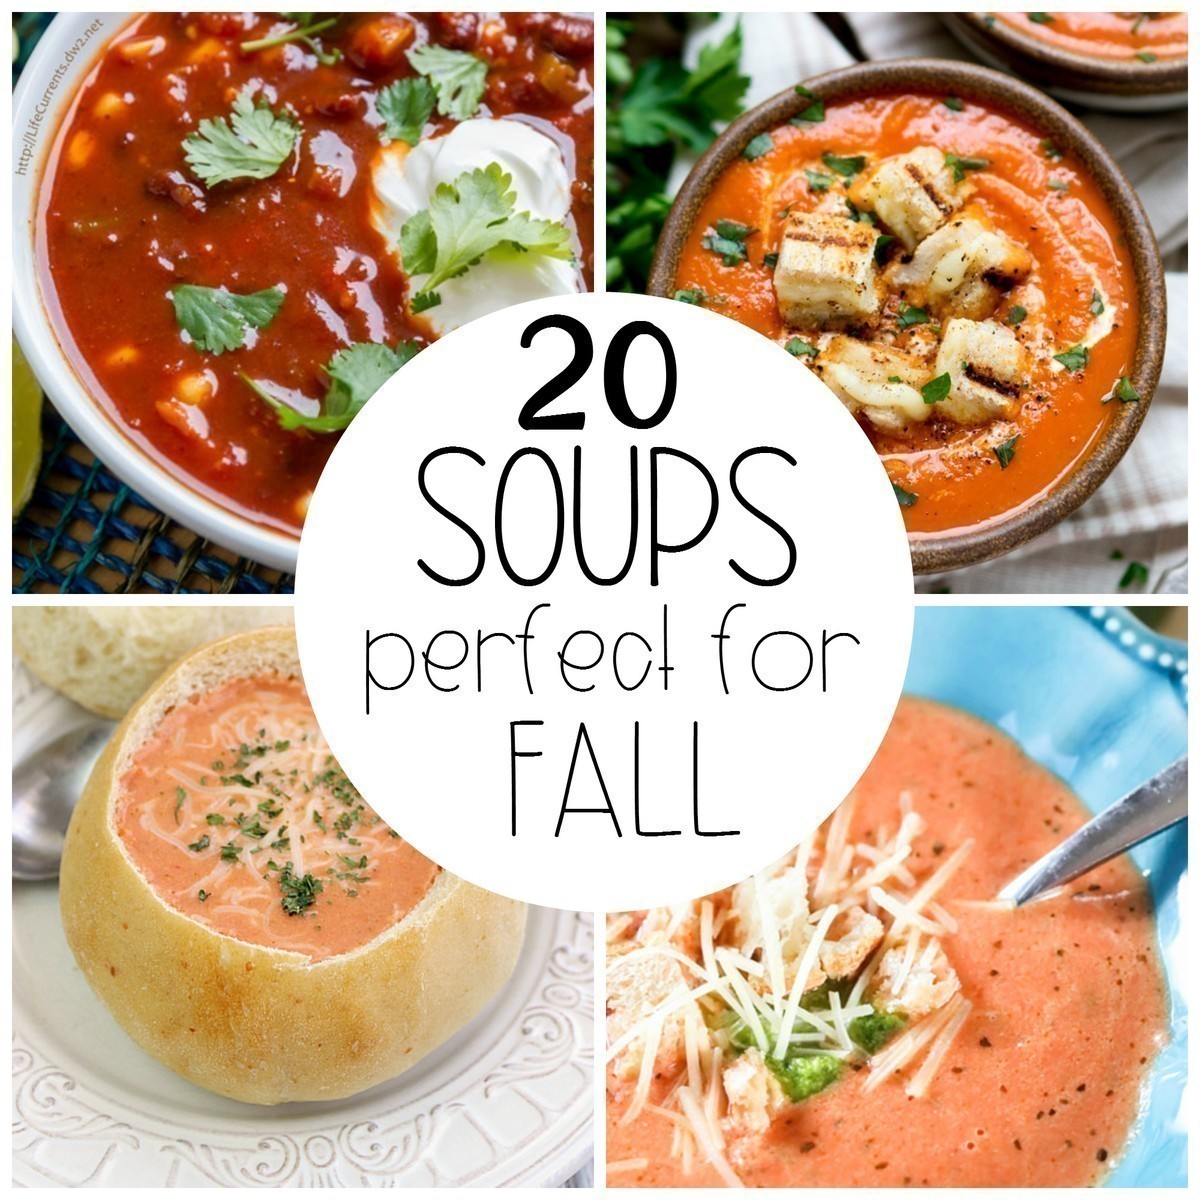 Pull out the crock pots and Instant Pot for cooler weather - here are 20 soups that are perfect for fall!